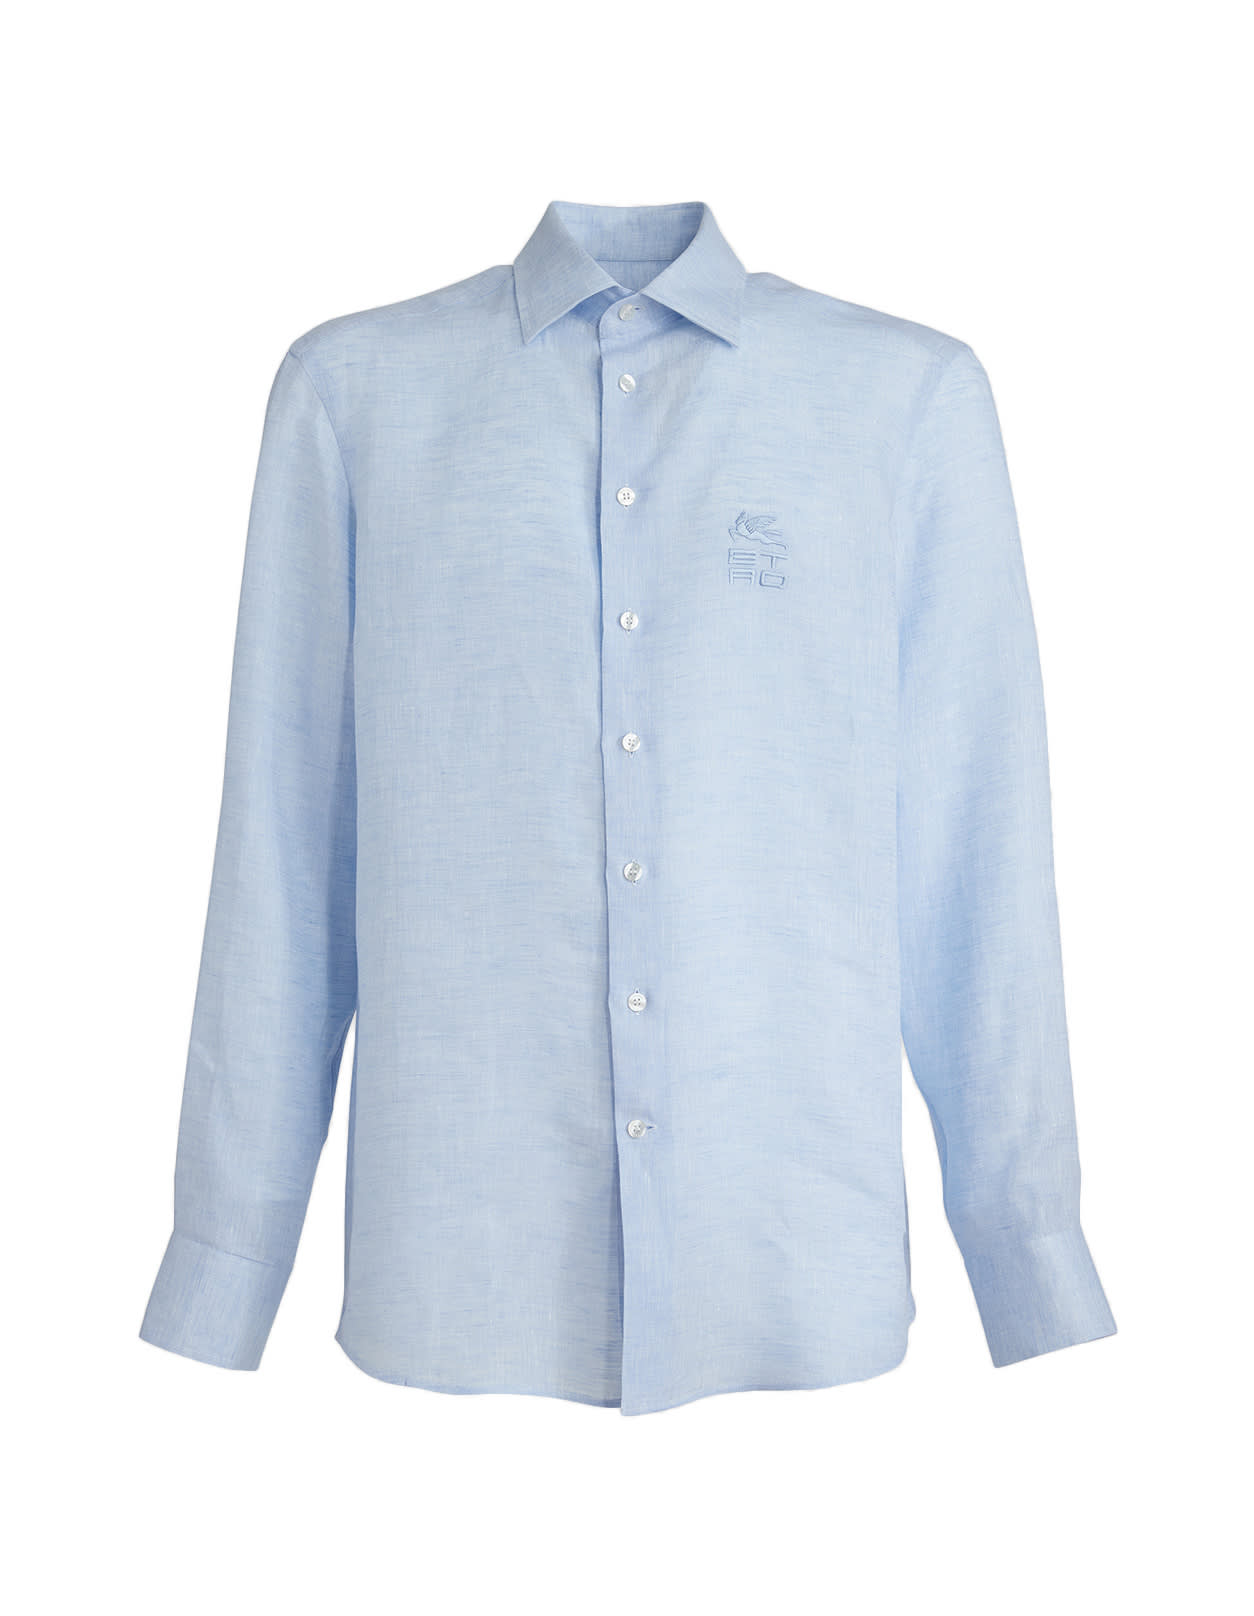 Man Shirt In Light Blue Linen With Embroidered Etro Cube Logo